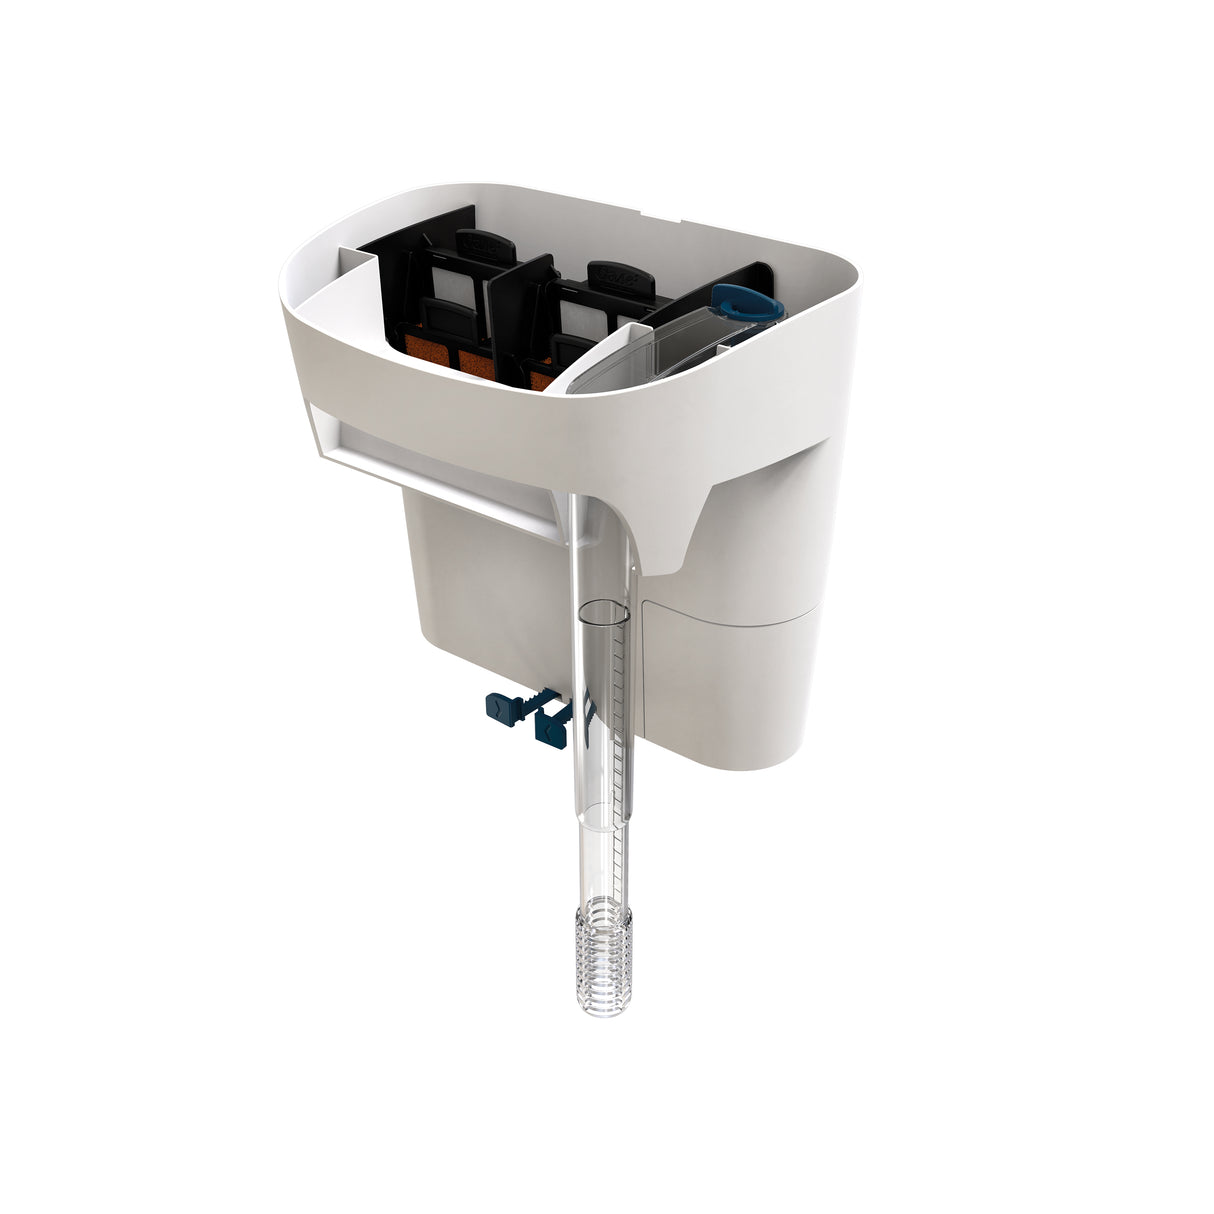 OASE BioStyle Thermo 30 White features multi-stage filtration